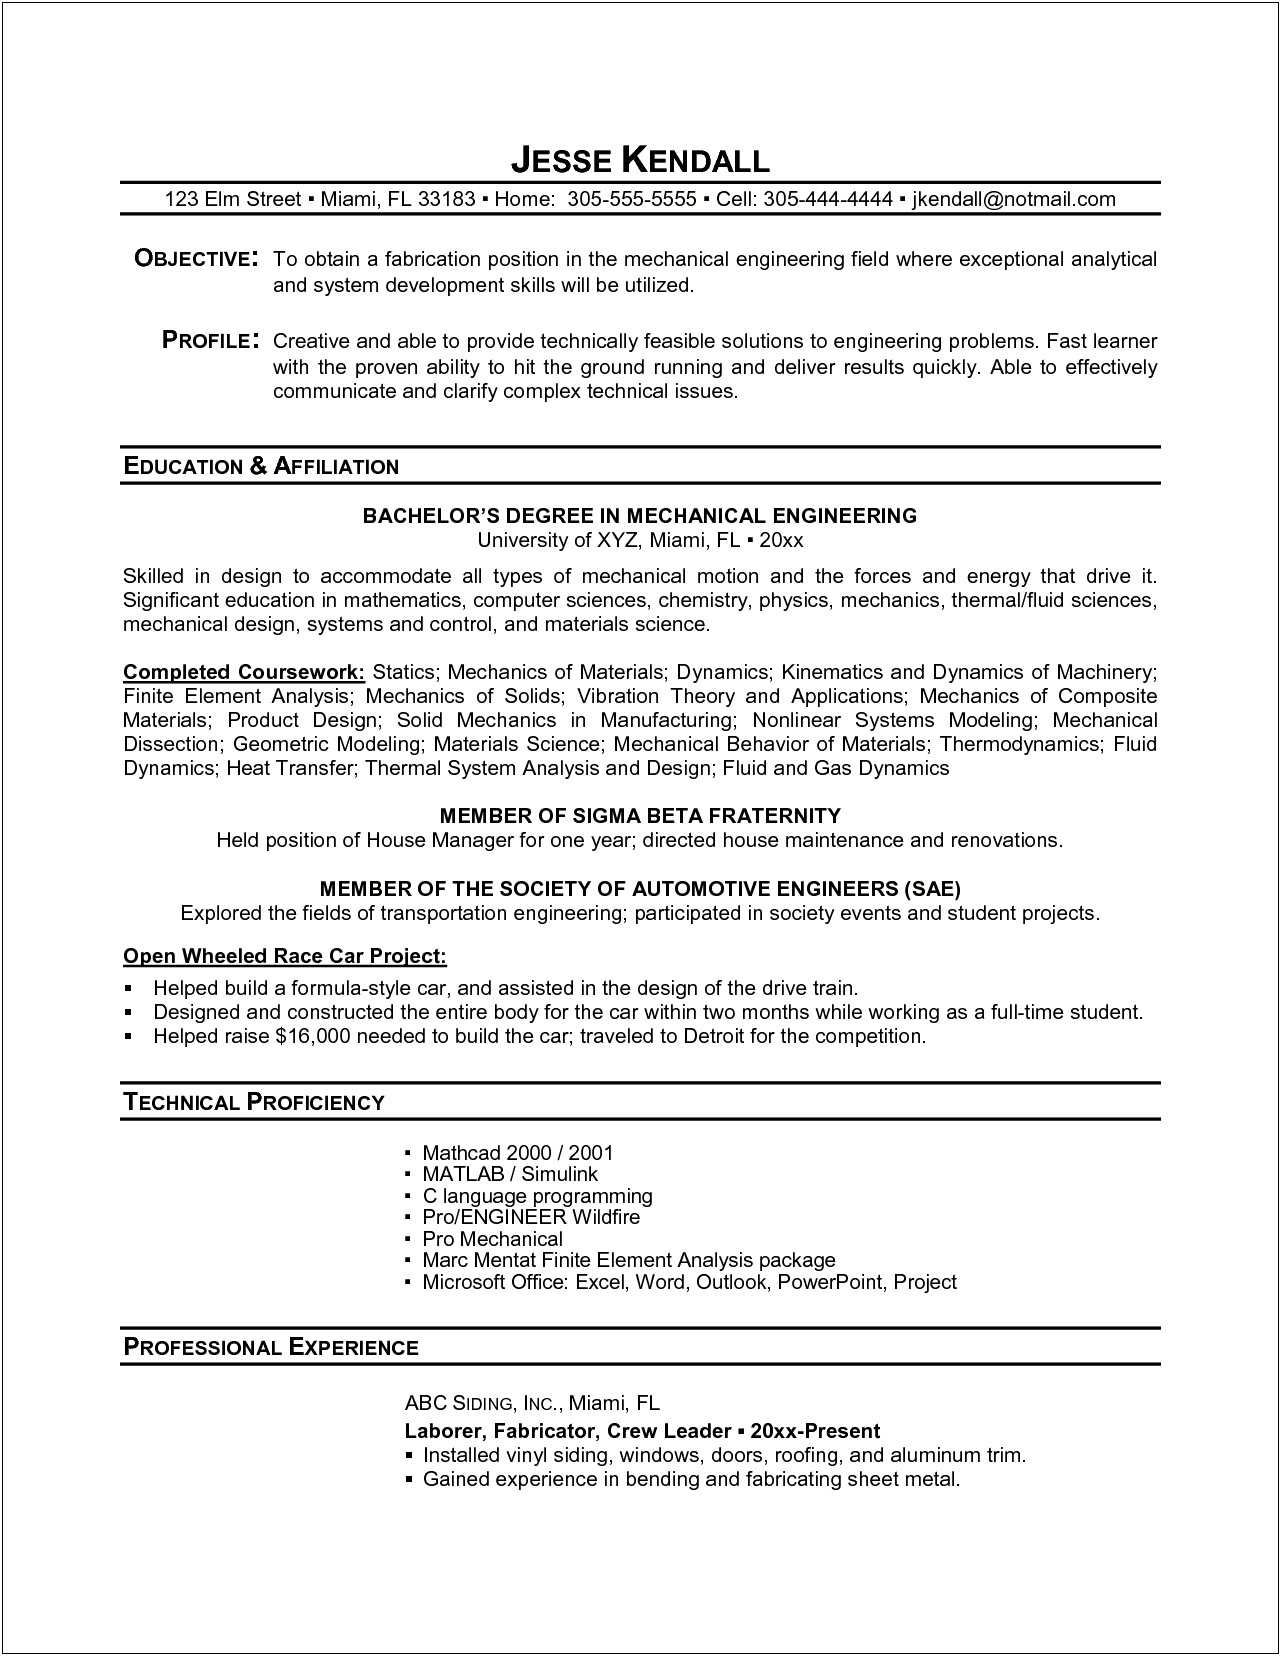 Resume Profile Or Objective Needed